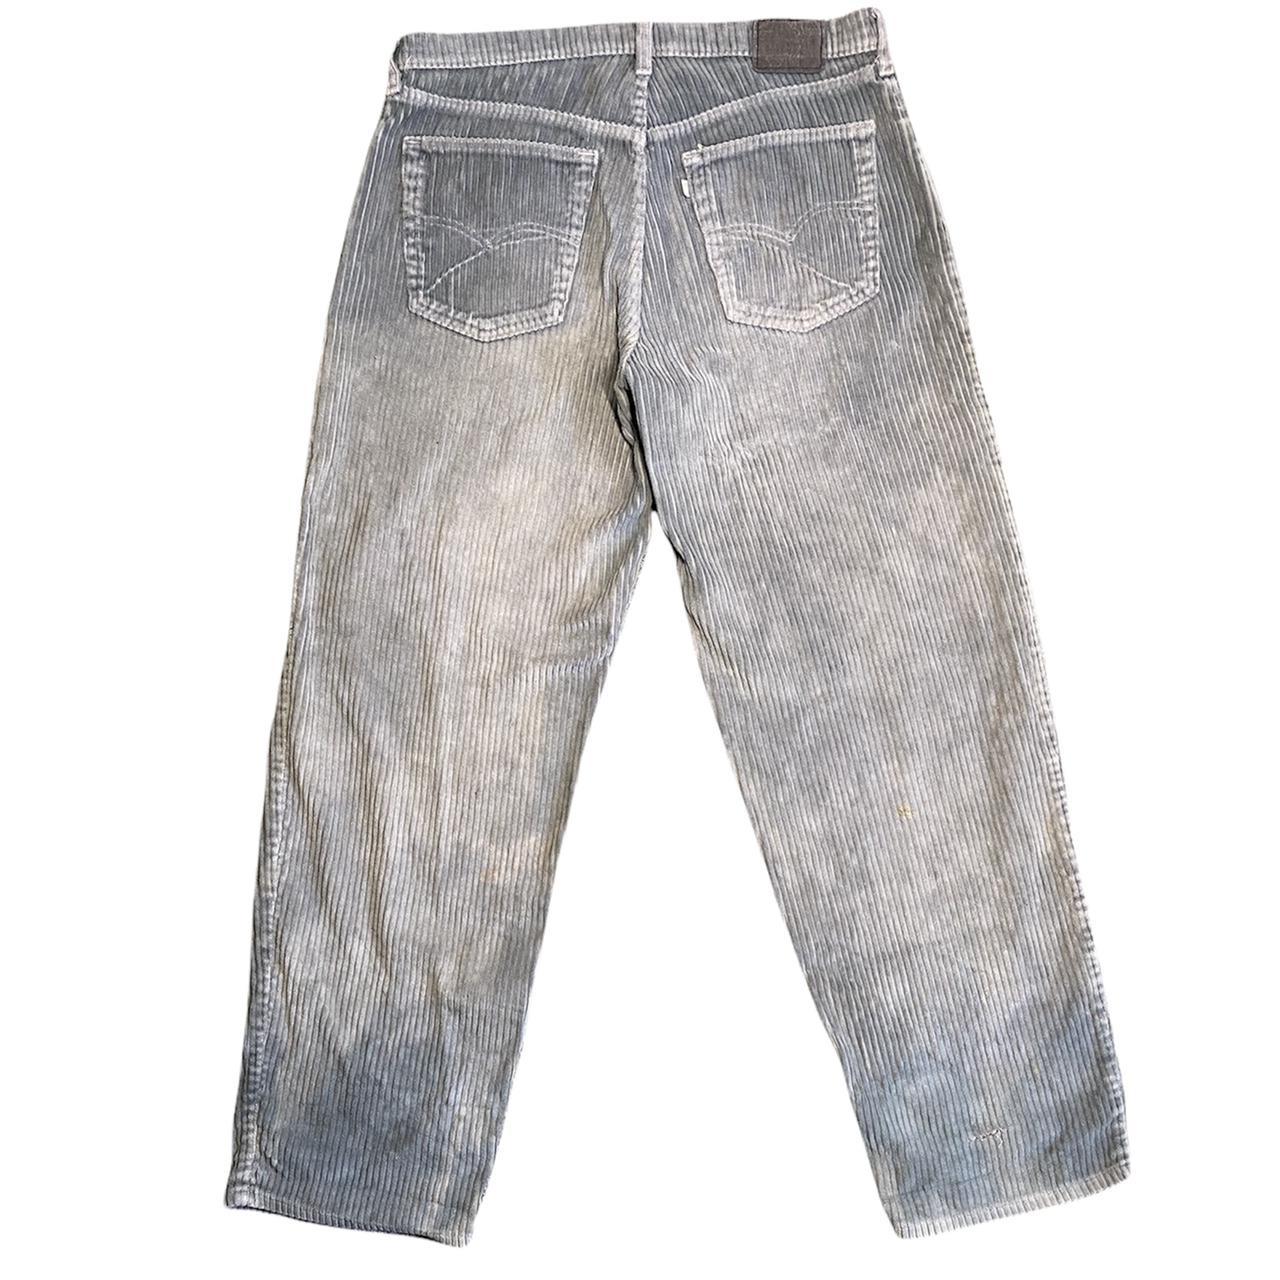 Product Image 1 - VINTAGE Grey Levi’s SilverTab Baggy